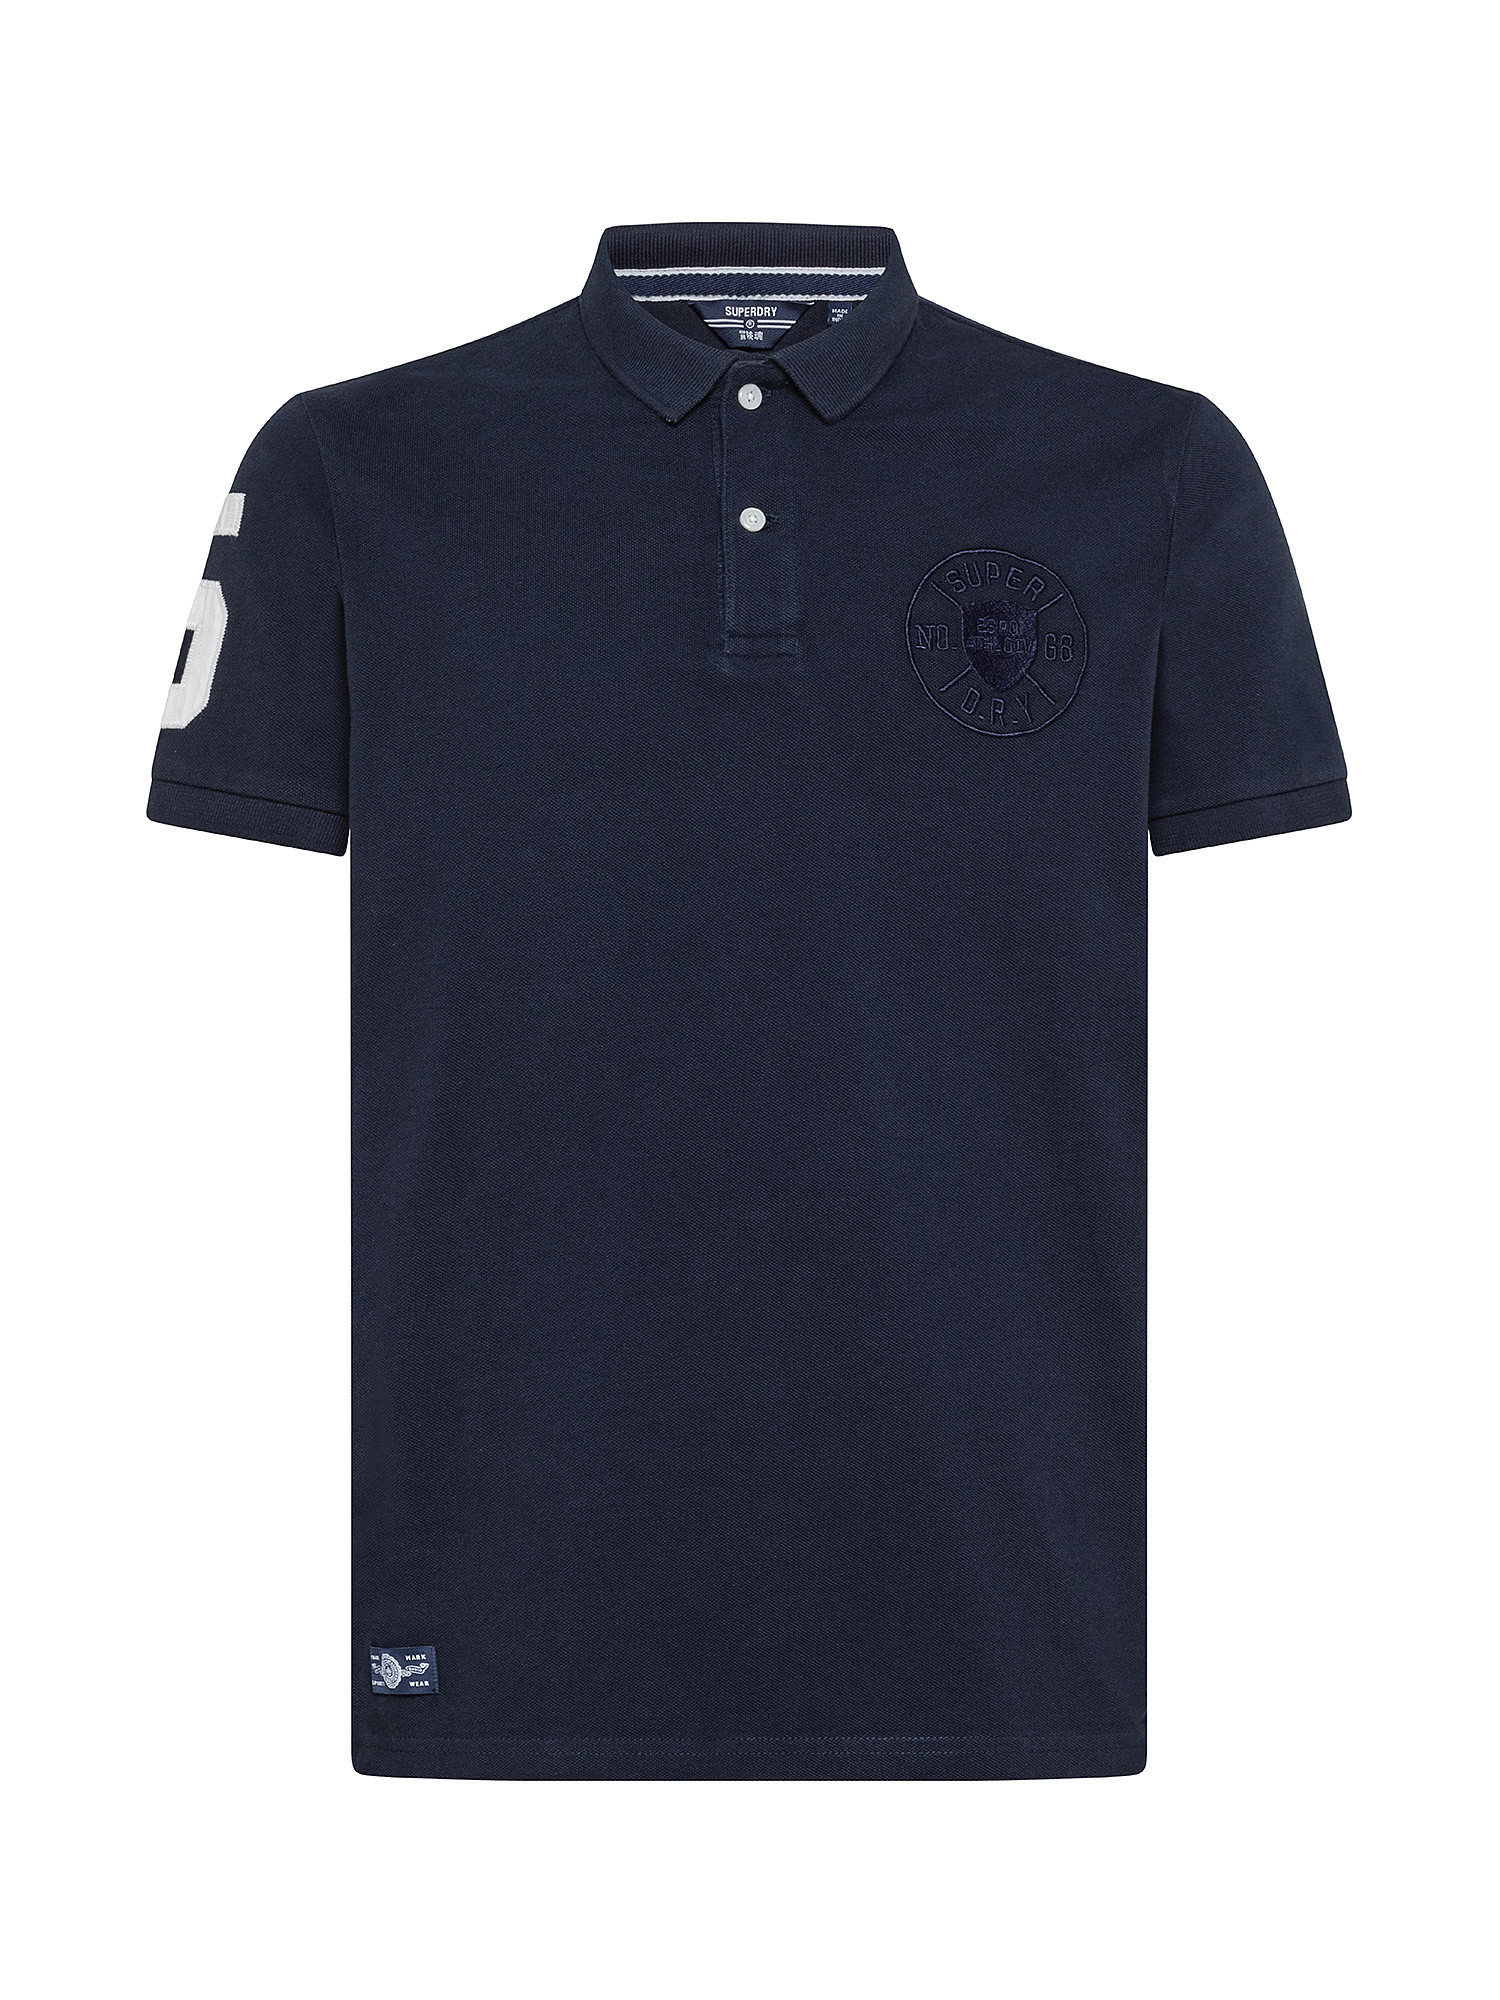 Polo shirt with embroidered graphics, Blue, large image number 0